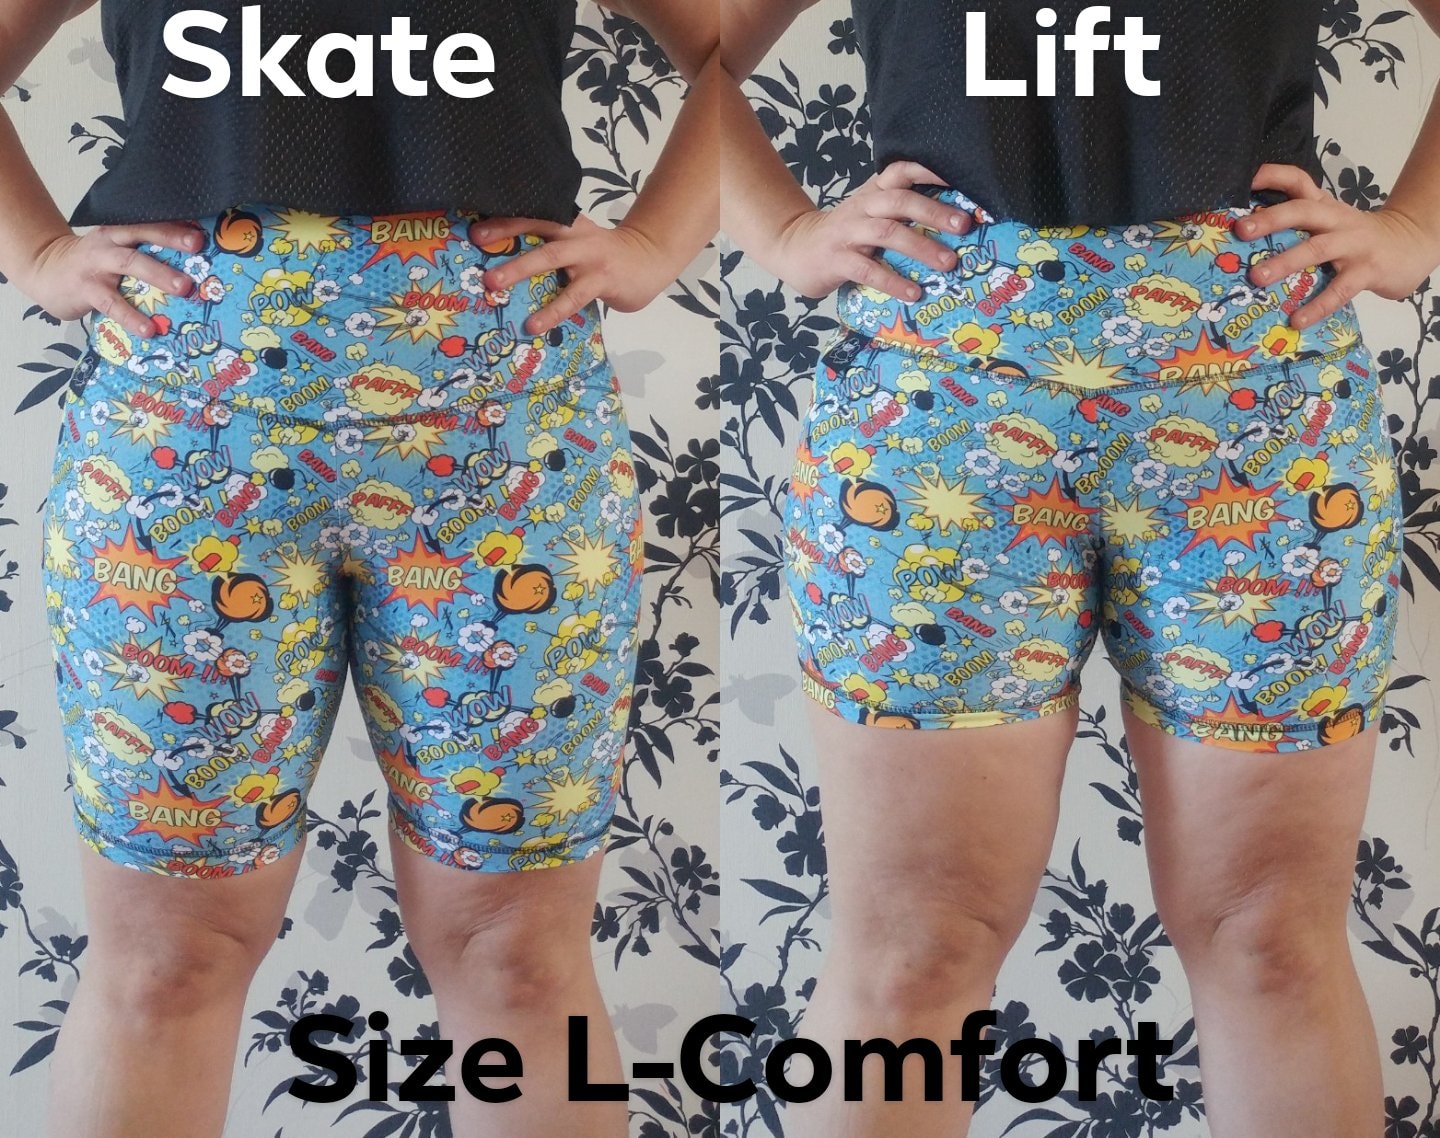 Two side by side images of myself wearing pairs of blue spandex shorts, a front view. The left is longer, the right is shorter. The captions read “Skate” on the top left, “Lift” on the top right, “Size L-Comfort” across the bottom. 